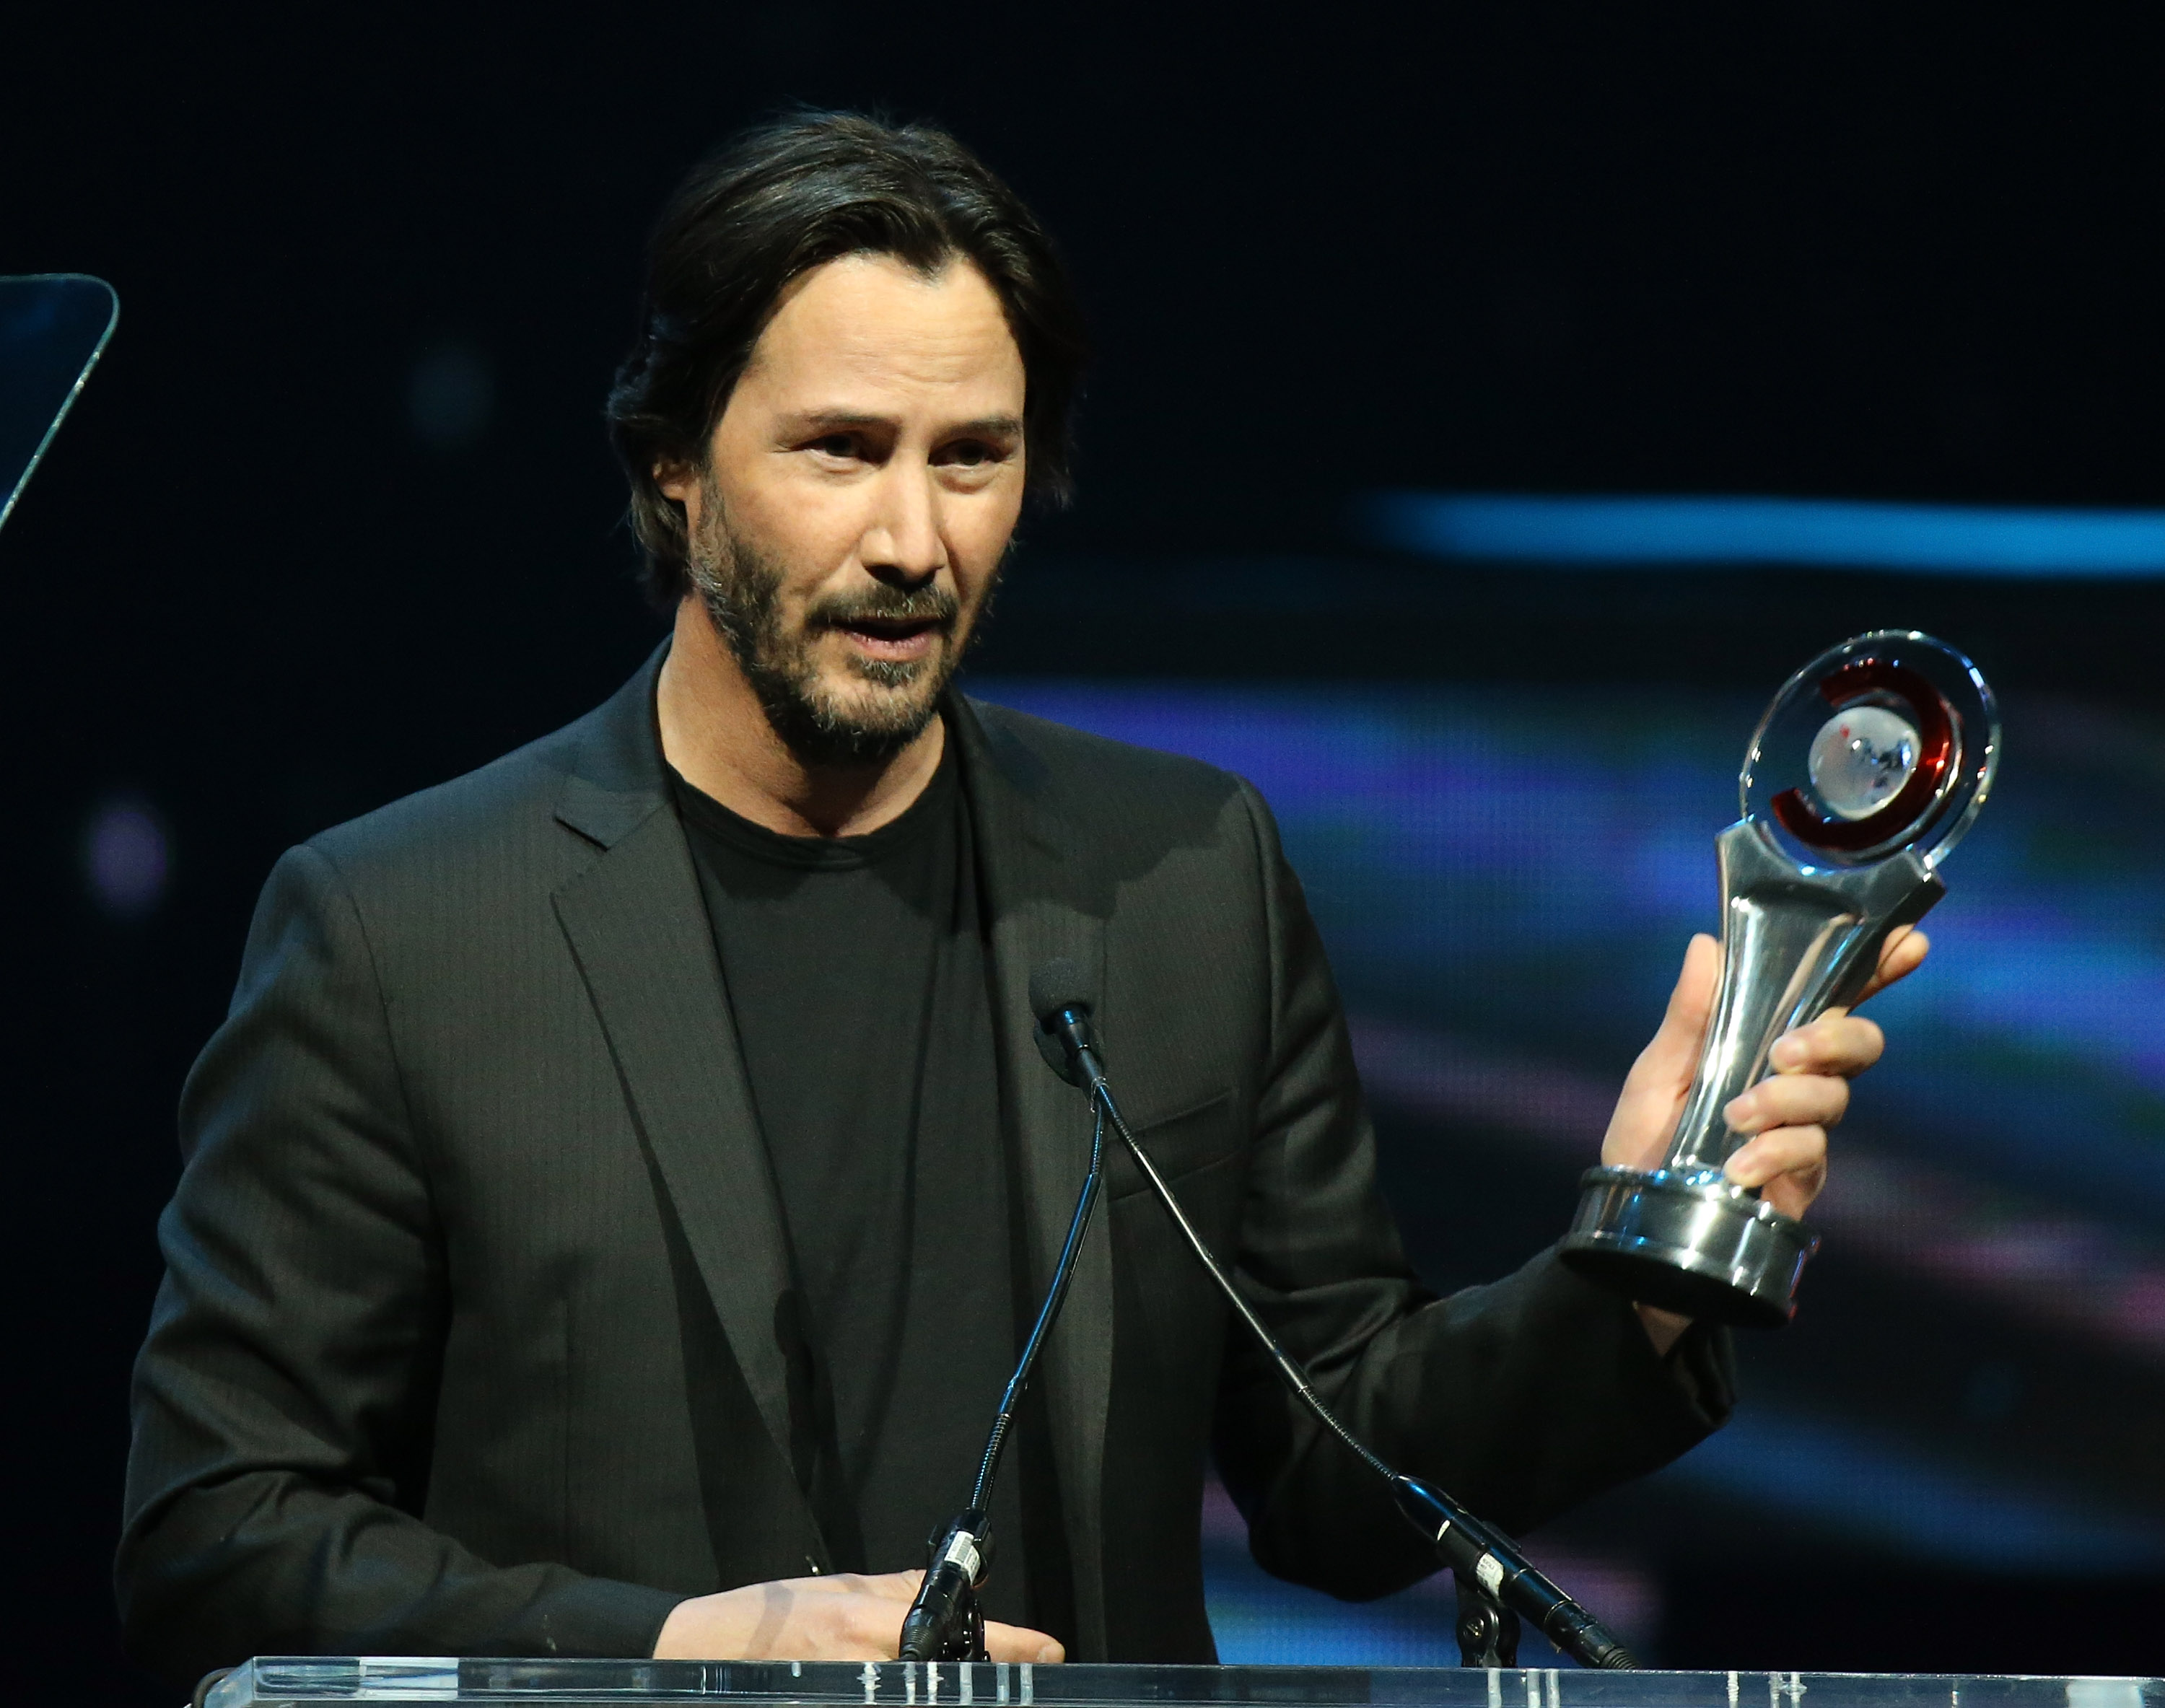 Keanu Reeves in Las Vegas, Nevada am 14. April 2016 | Quelle: Getty Images